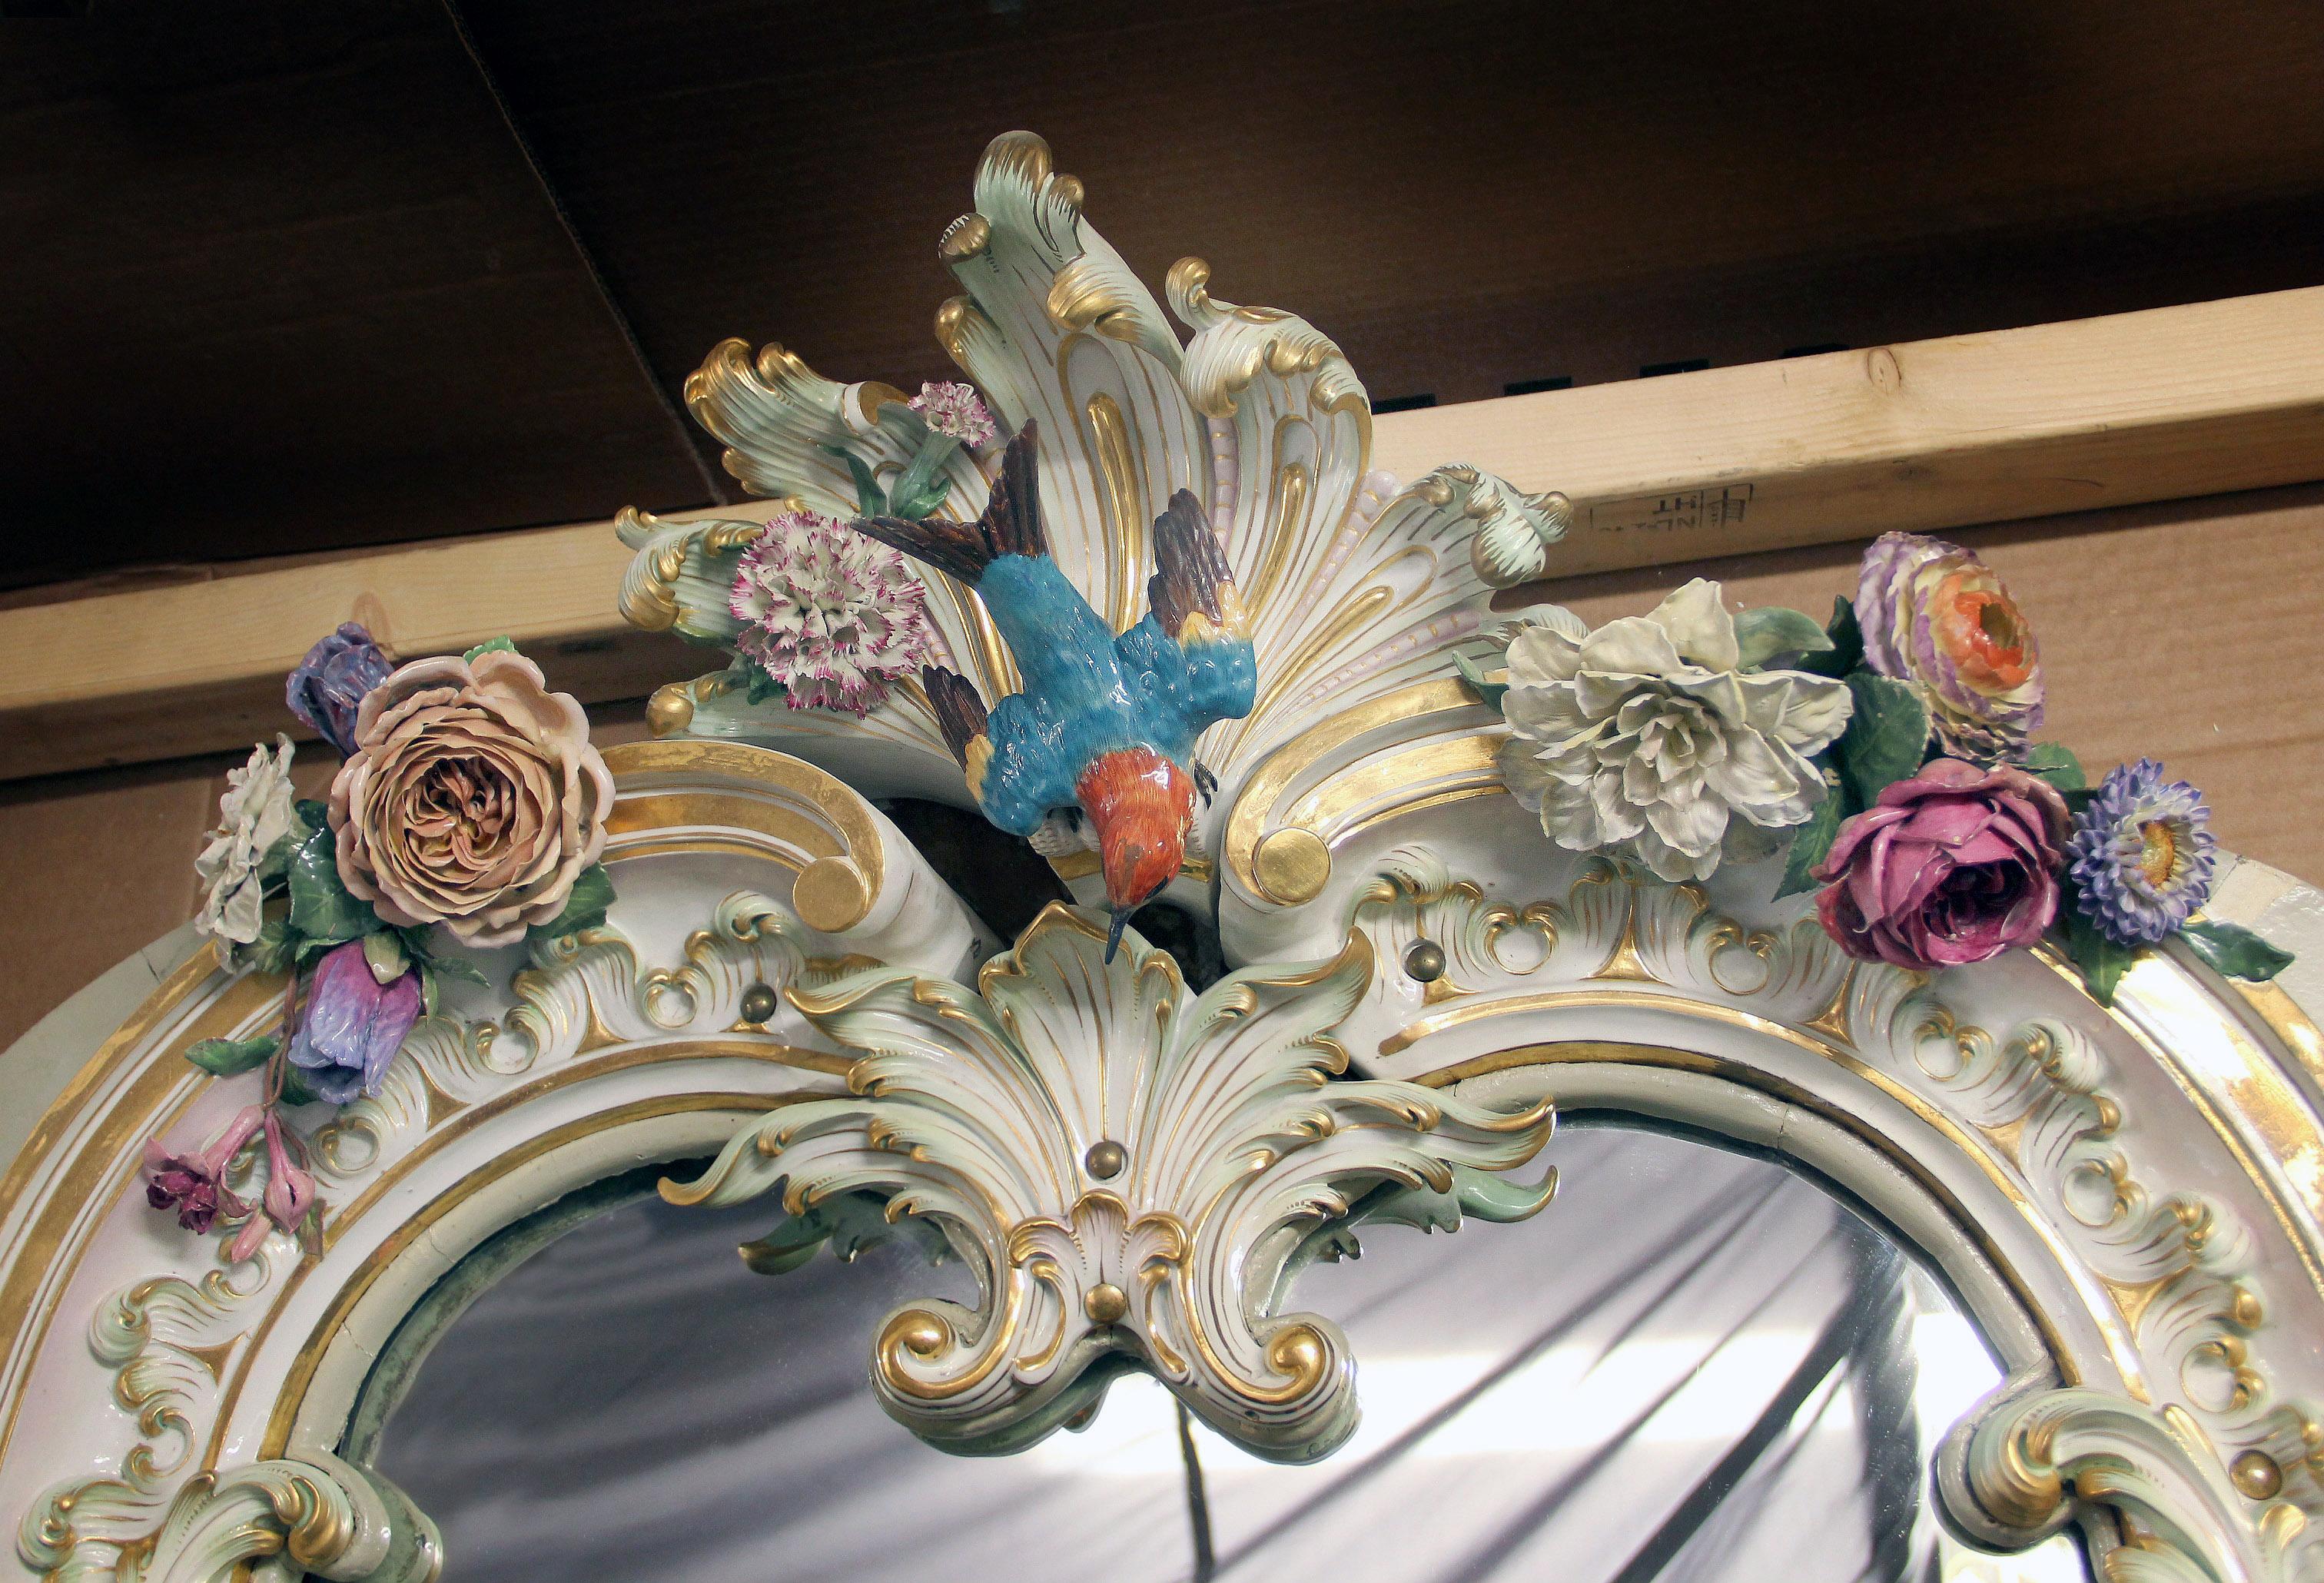 A Unique and Monumental Late 19th Century German Meissen Porcelain Mirror

This palatial mirror is made up of around 12 wonderful individually hand crafted pieces of porcelain. The top, centered with a large beautiful bird surrounded by flowers,